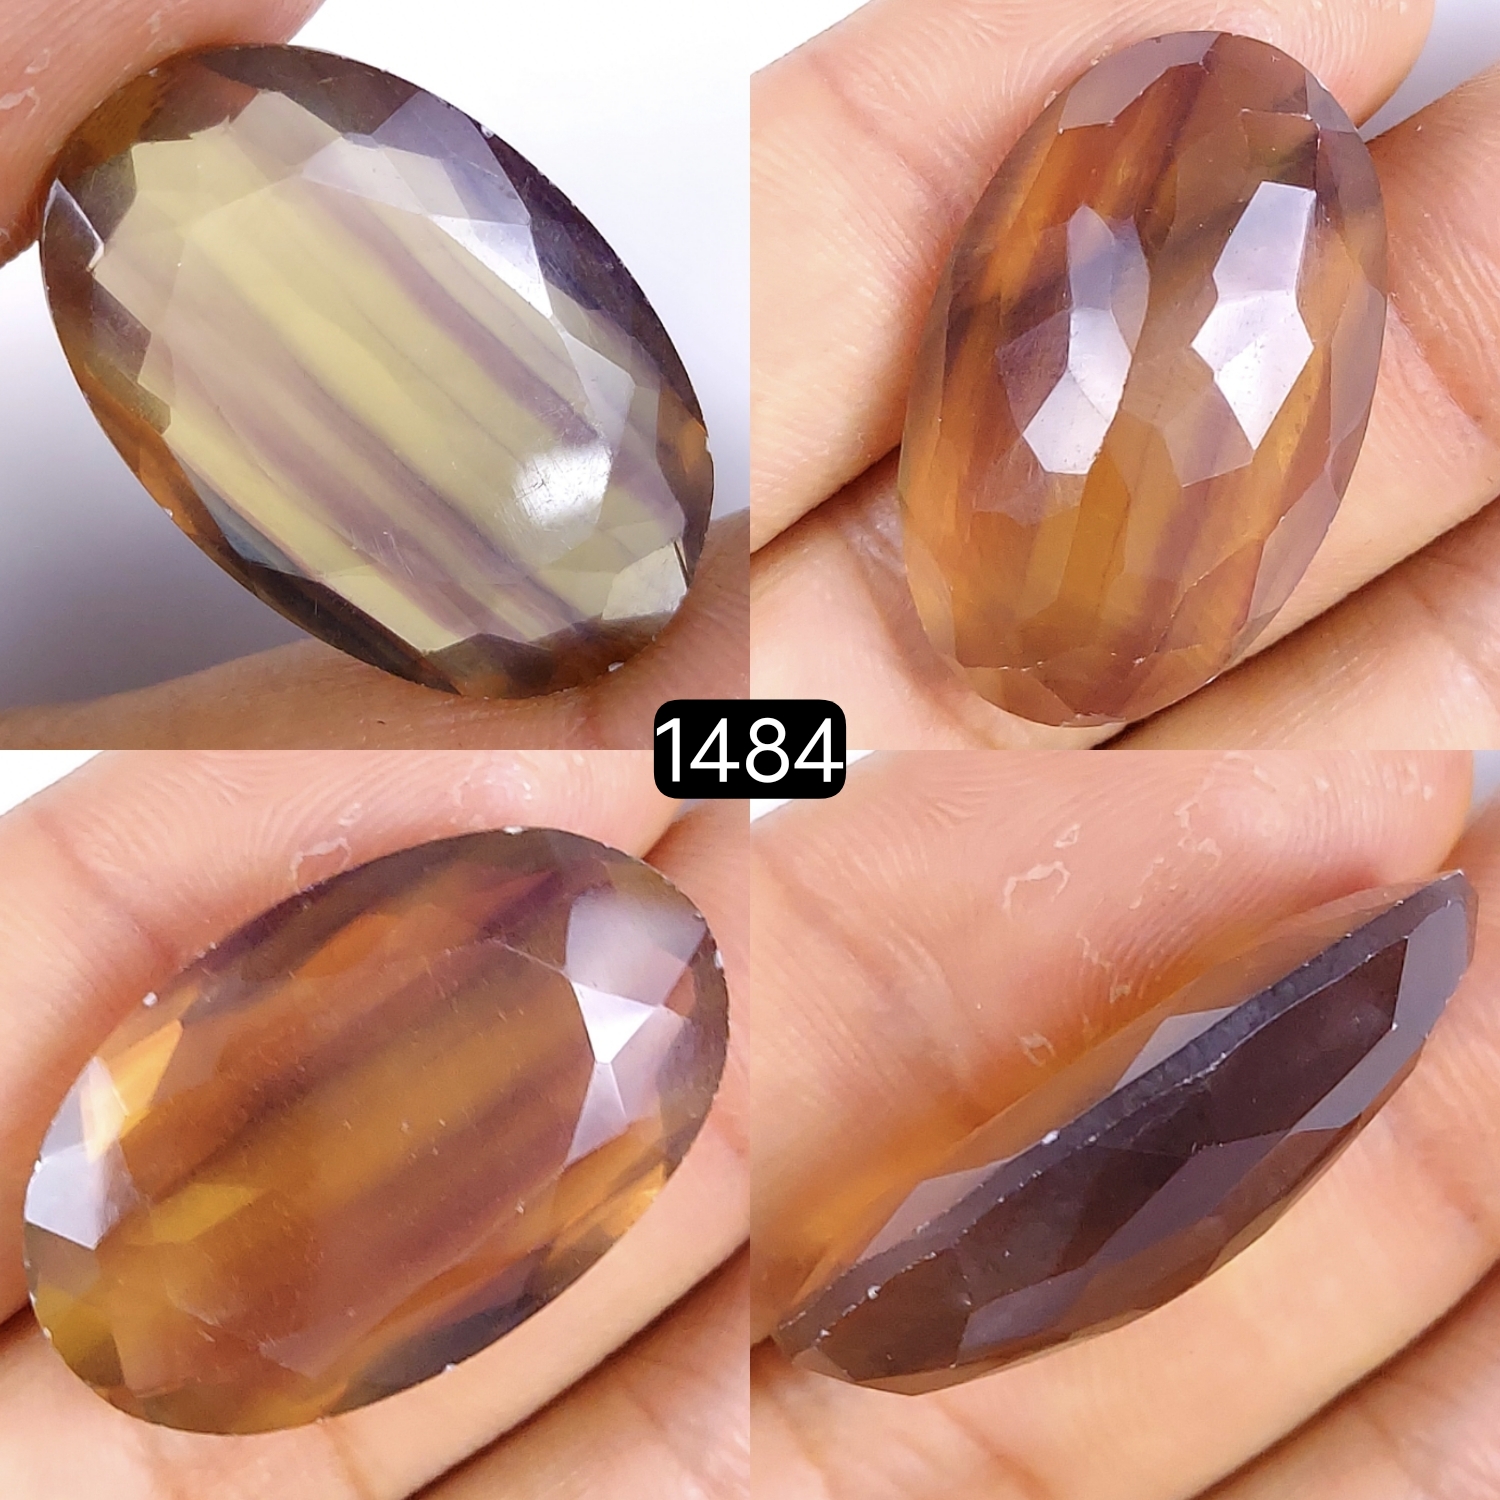 1Pc 46Cts Natural Multi Fluorite Faceted Cabochon Gemstone Oval Shape Crystal 30x20mm#1484